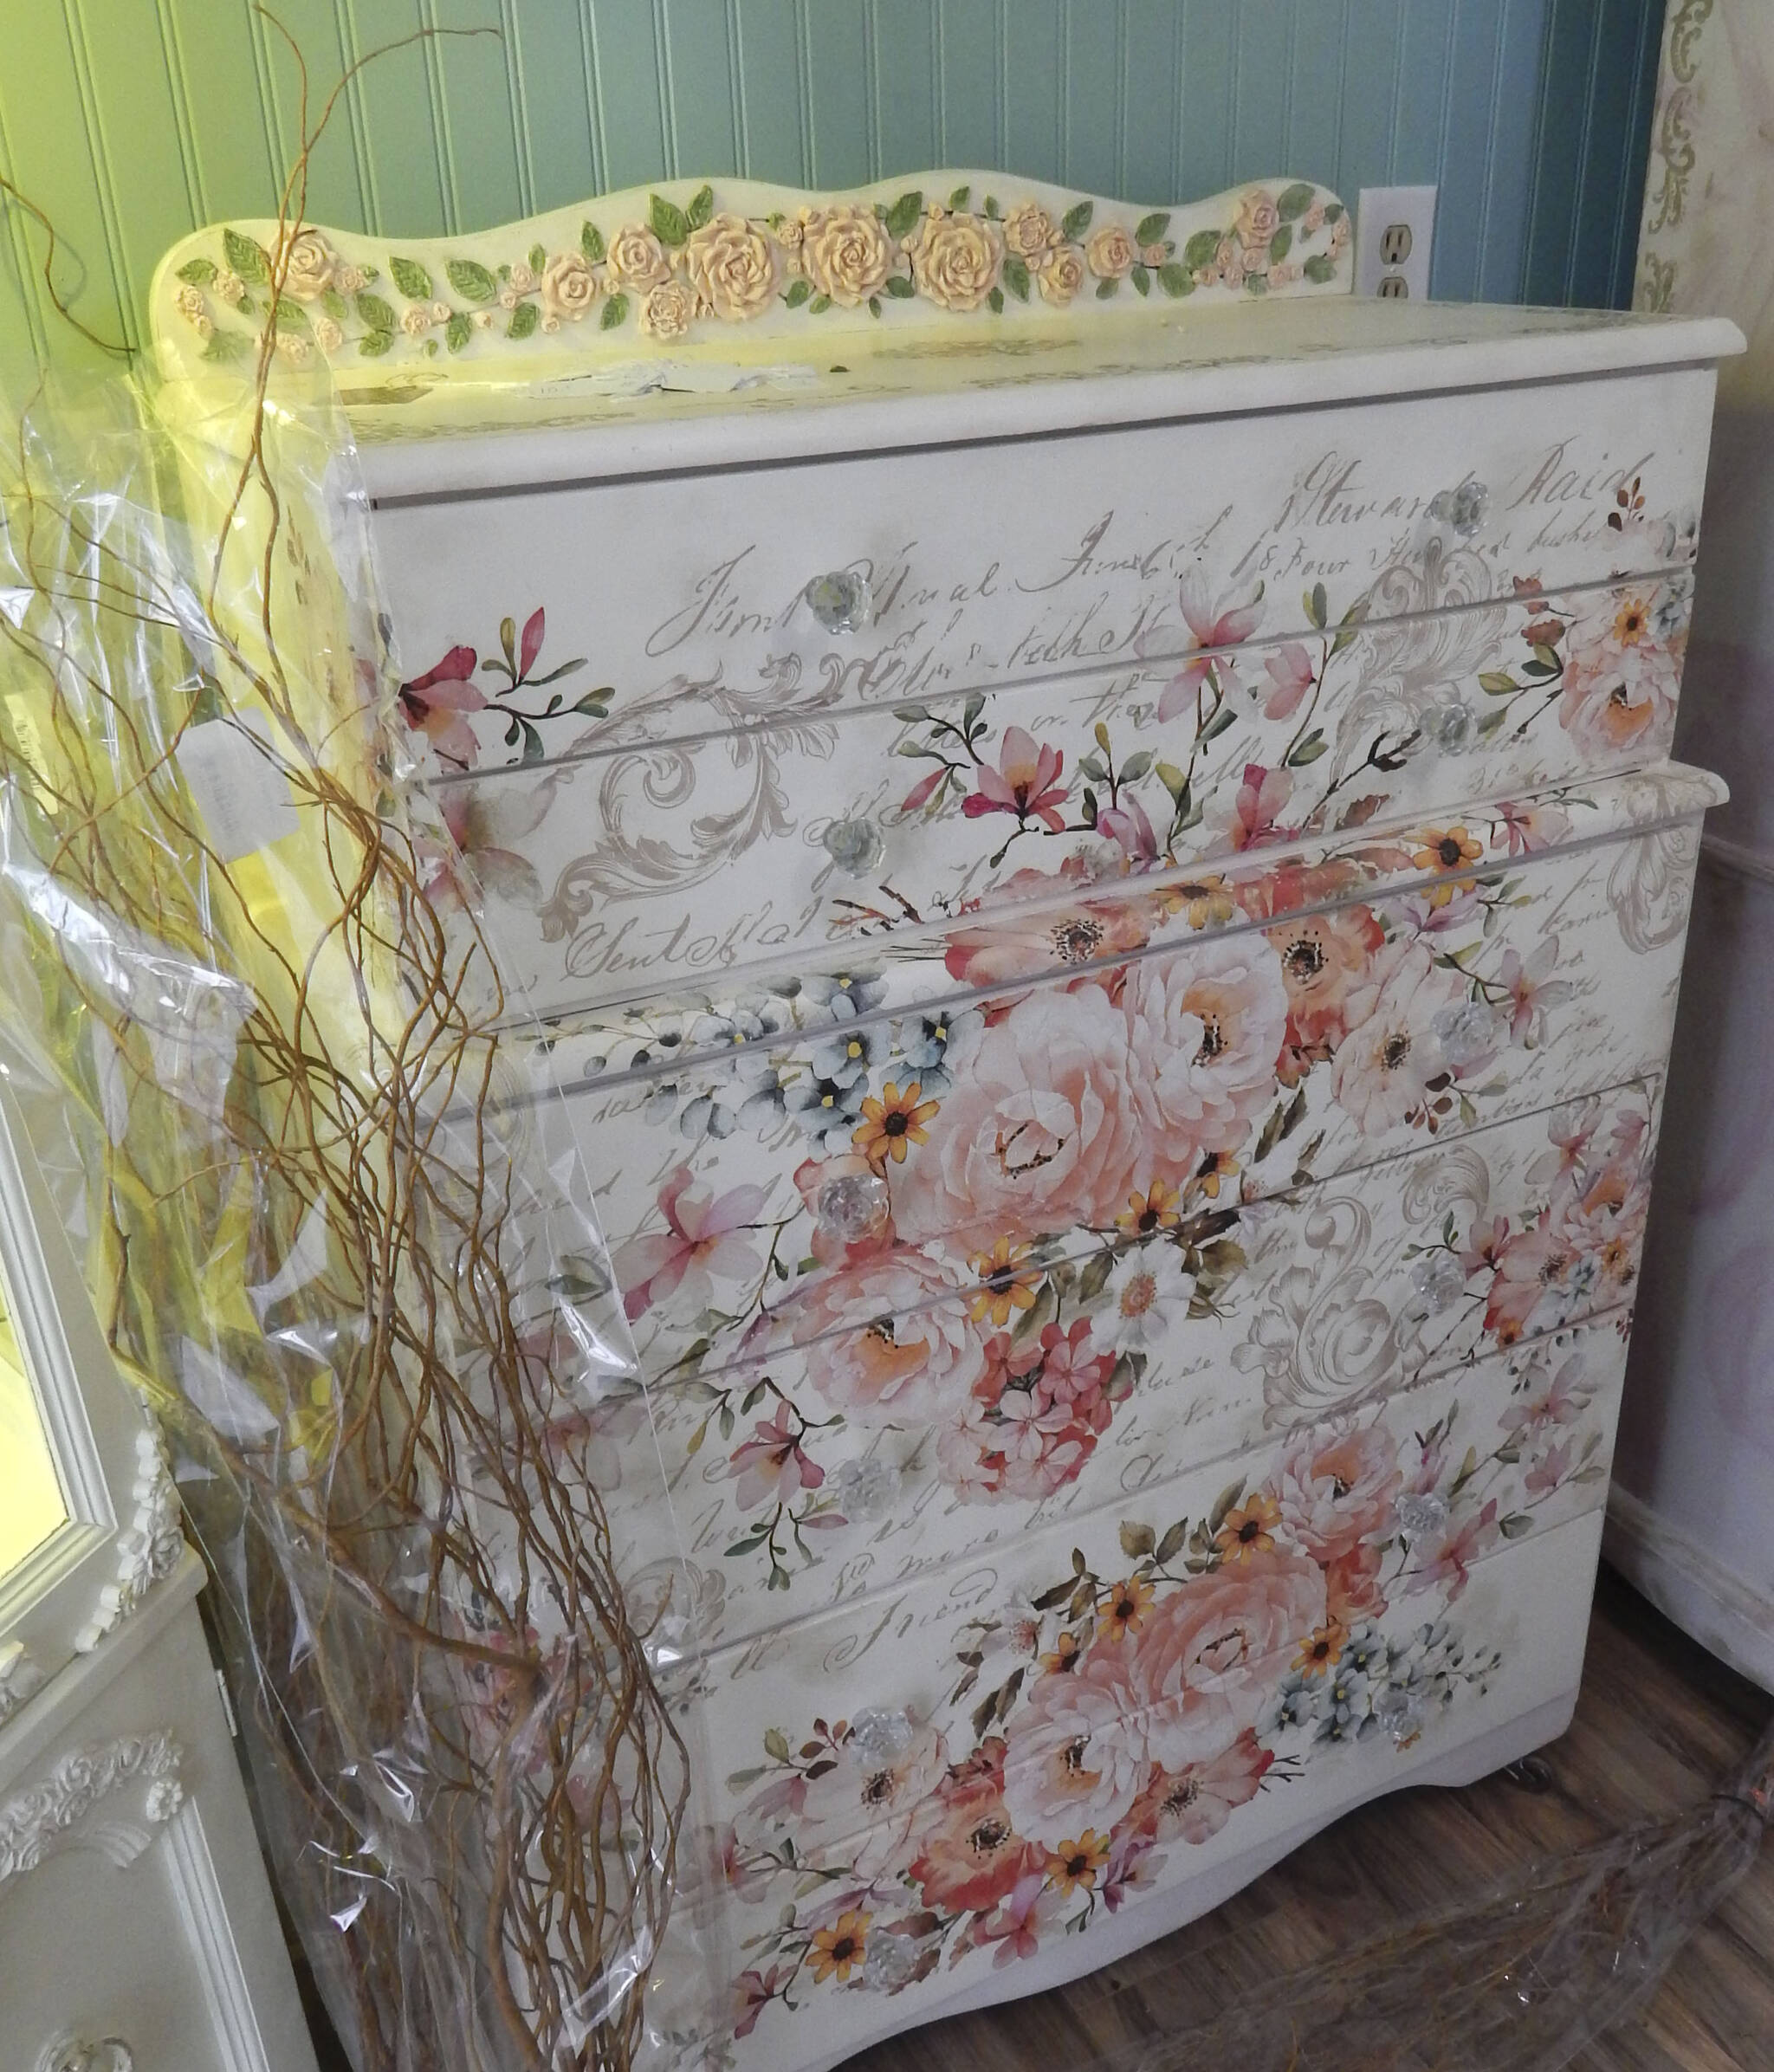 Offering new and repurposed painted furniture with a mixture of decoupage and other artistic details. Photo Christi Baron